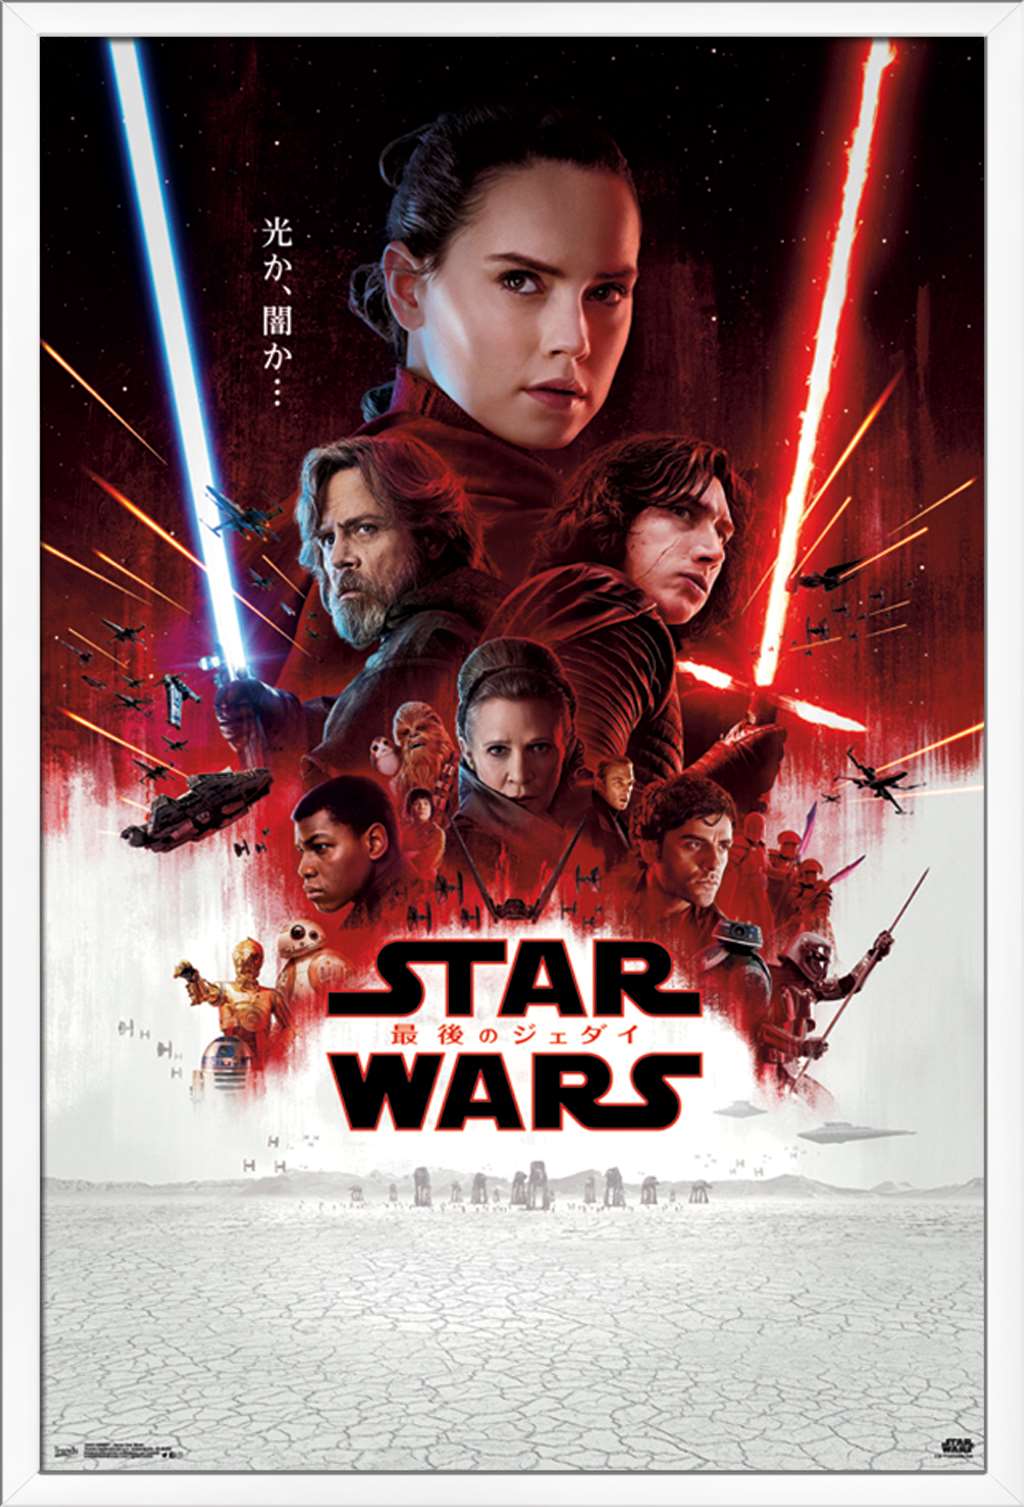 Star Wars: The Last Jedi - Japan One Sheet Wall Poster, 22.375" x 34", Framed - image 1 of 2